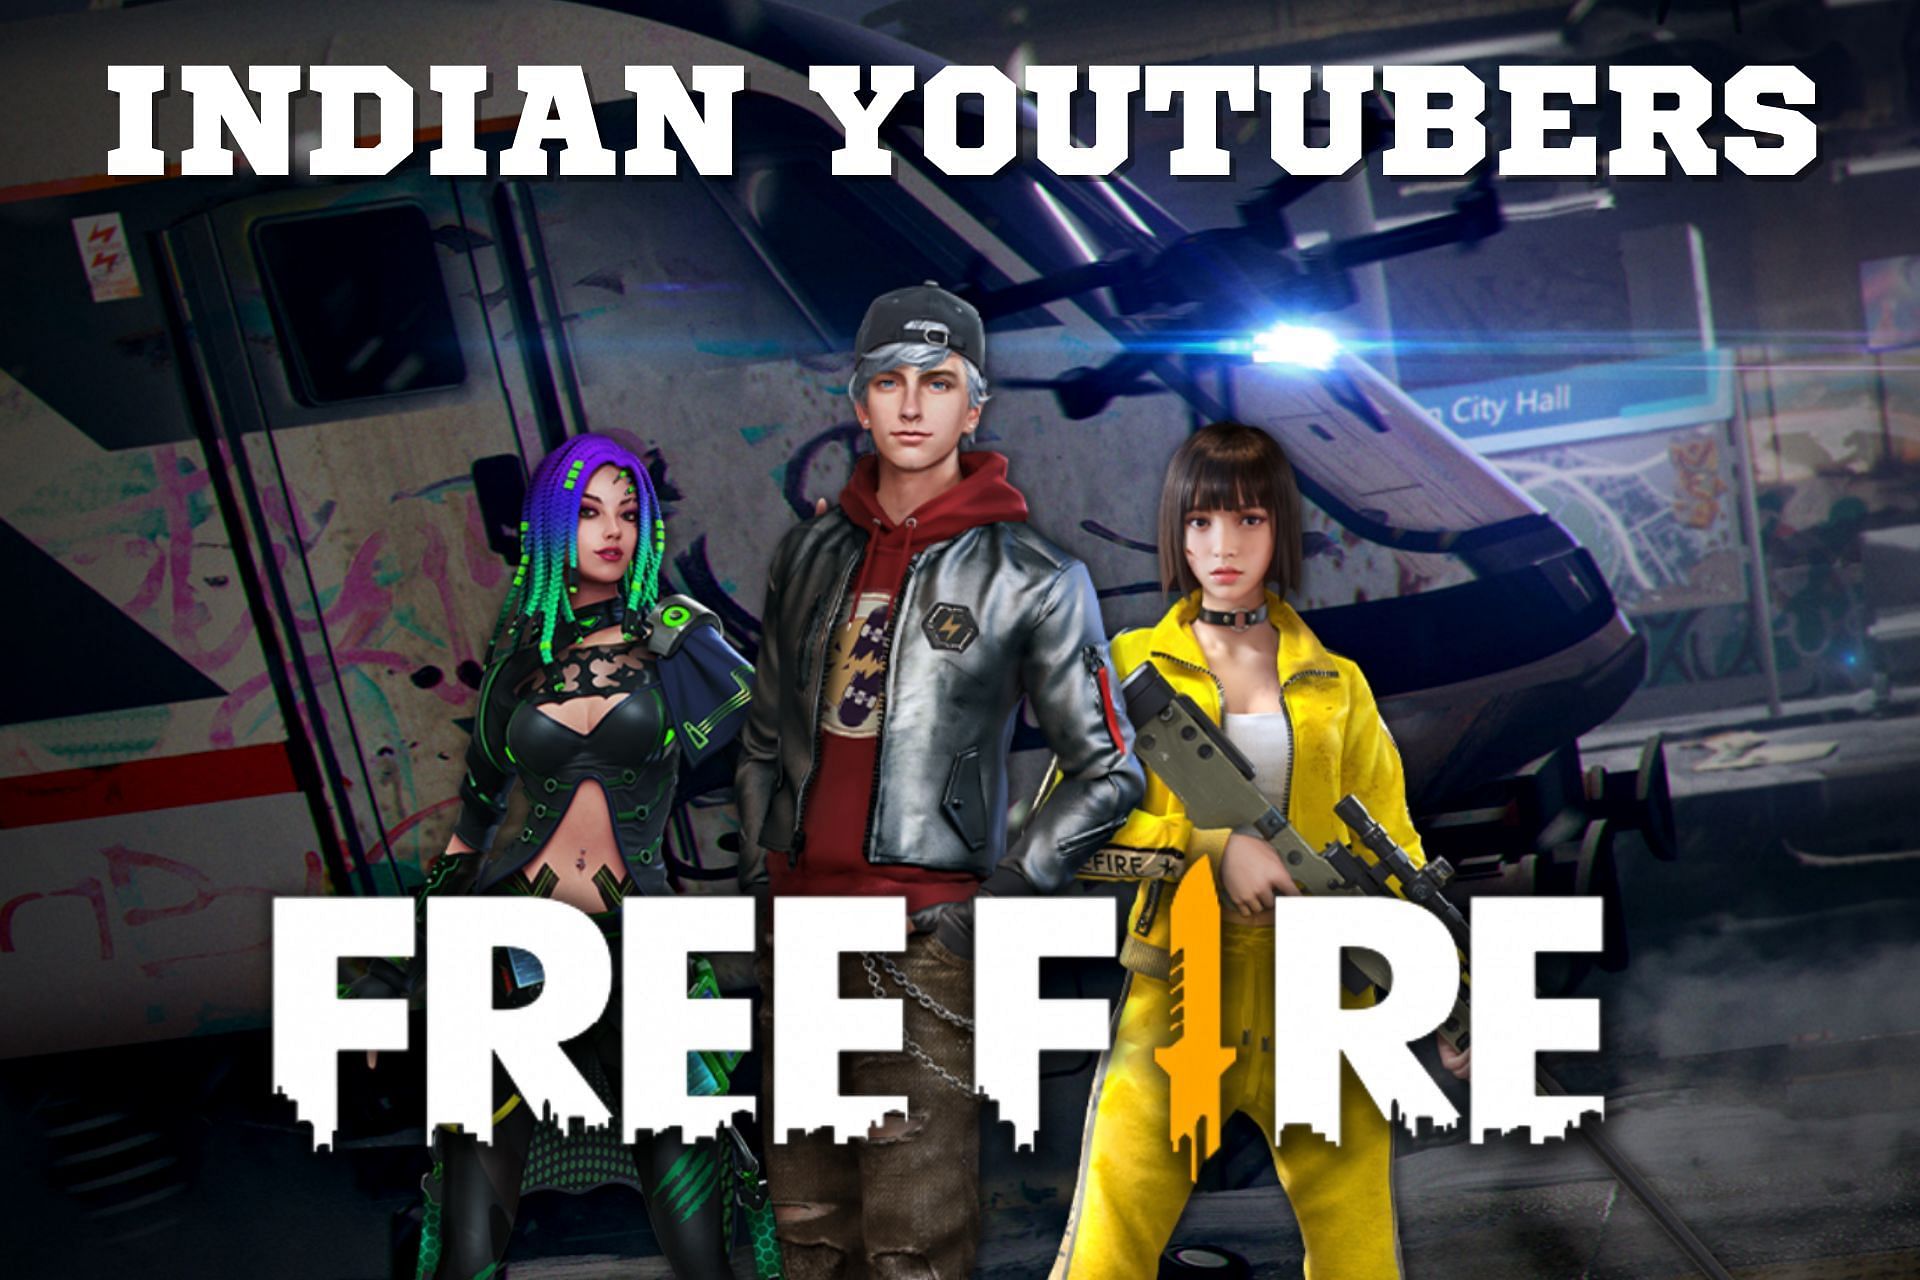 Free Fire has its fair share of talented Indian YouTubers (Image via Sportskeeda)